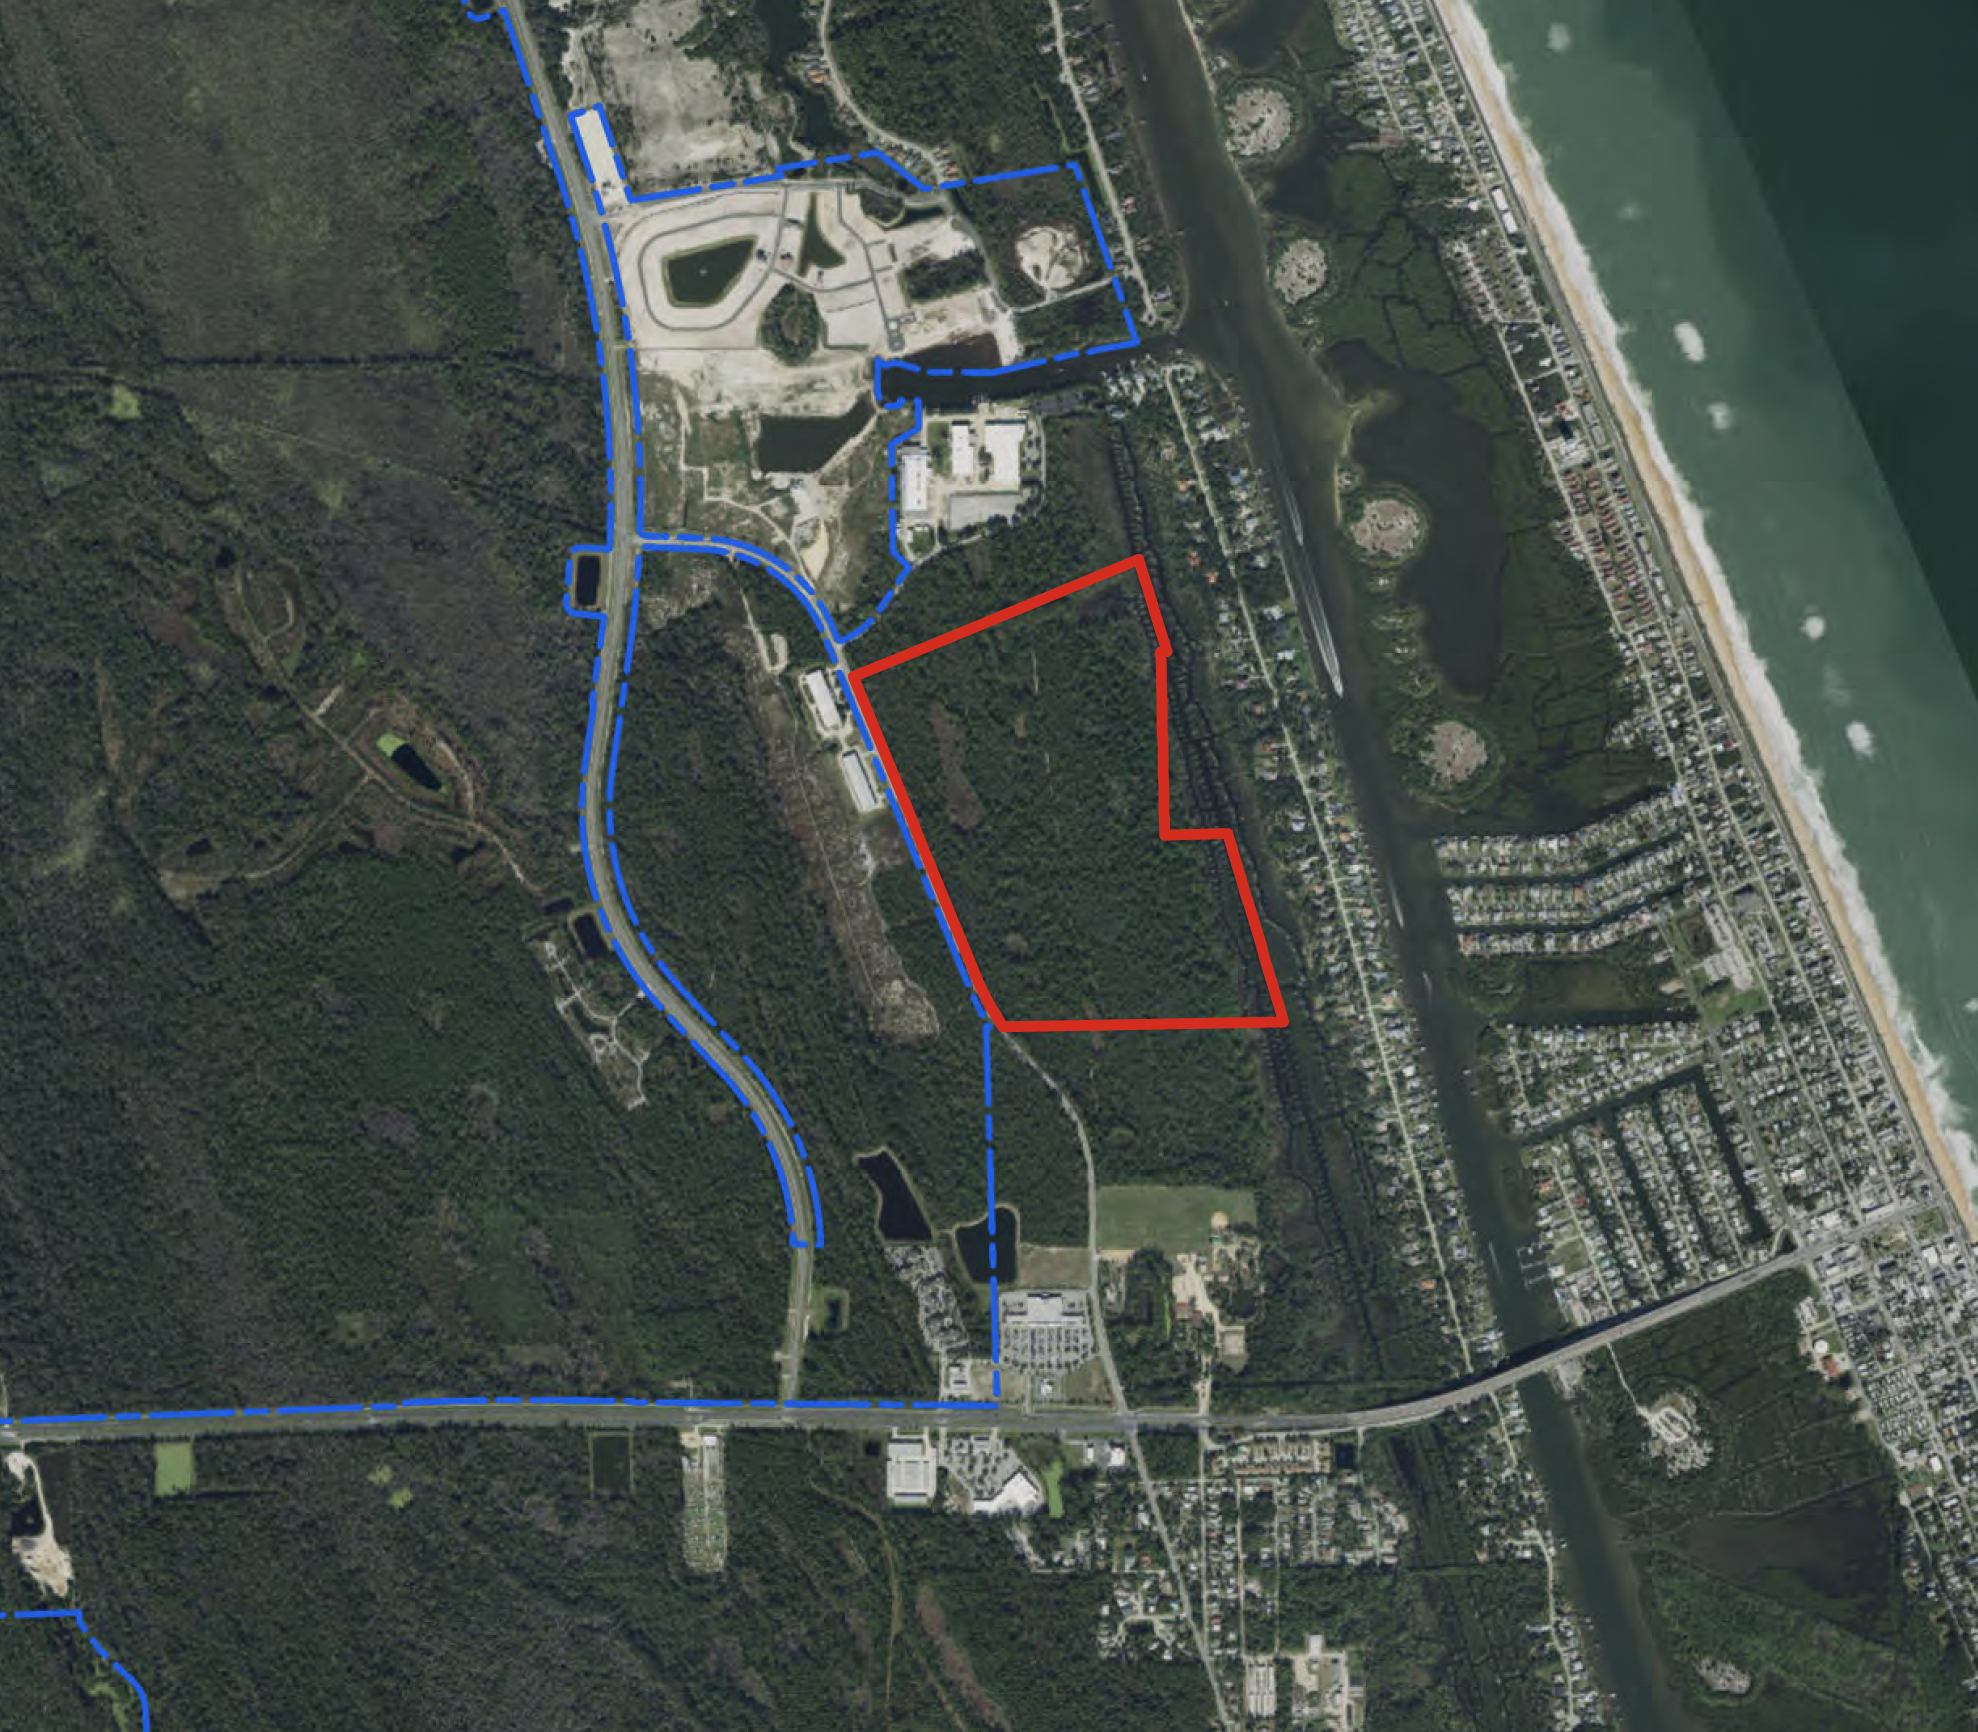 The Grand Reserve East property south of the Boston Whaler plant. Image courtesy of the city of Palm Coast